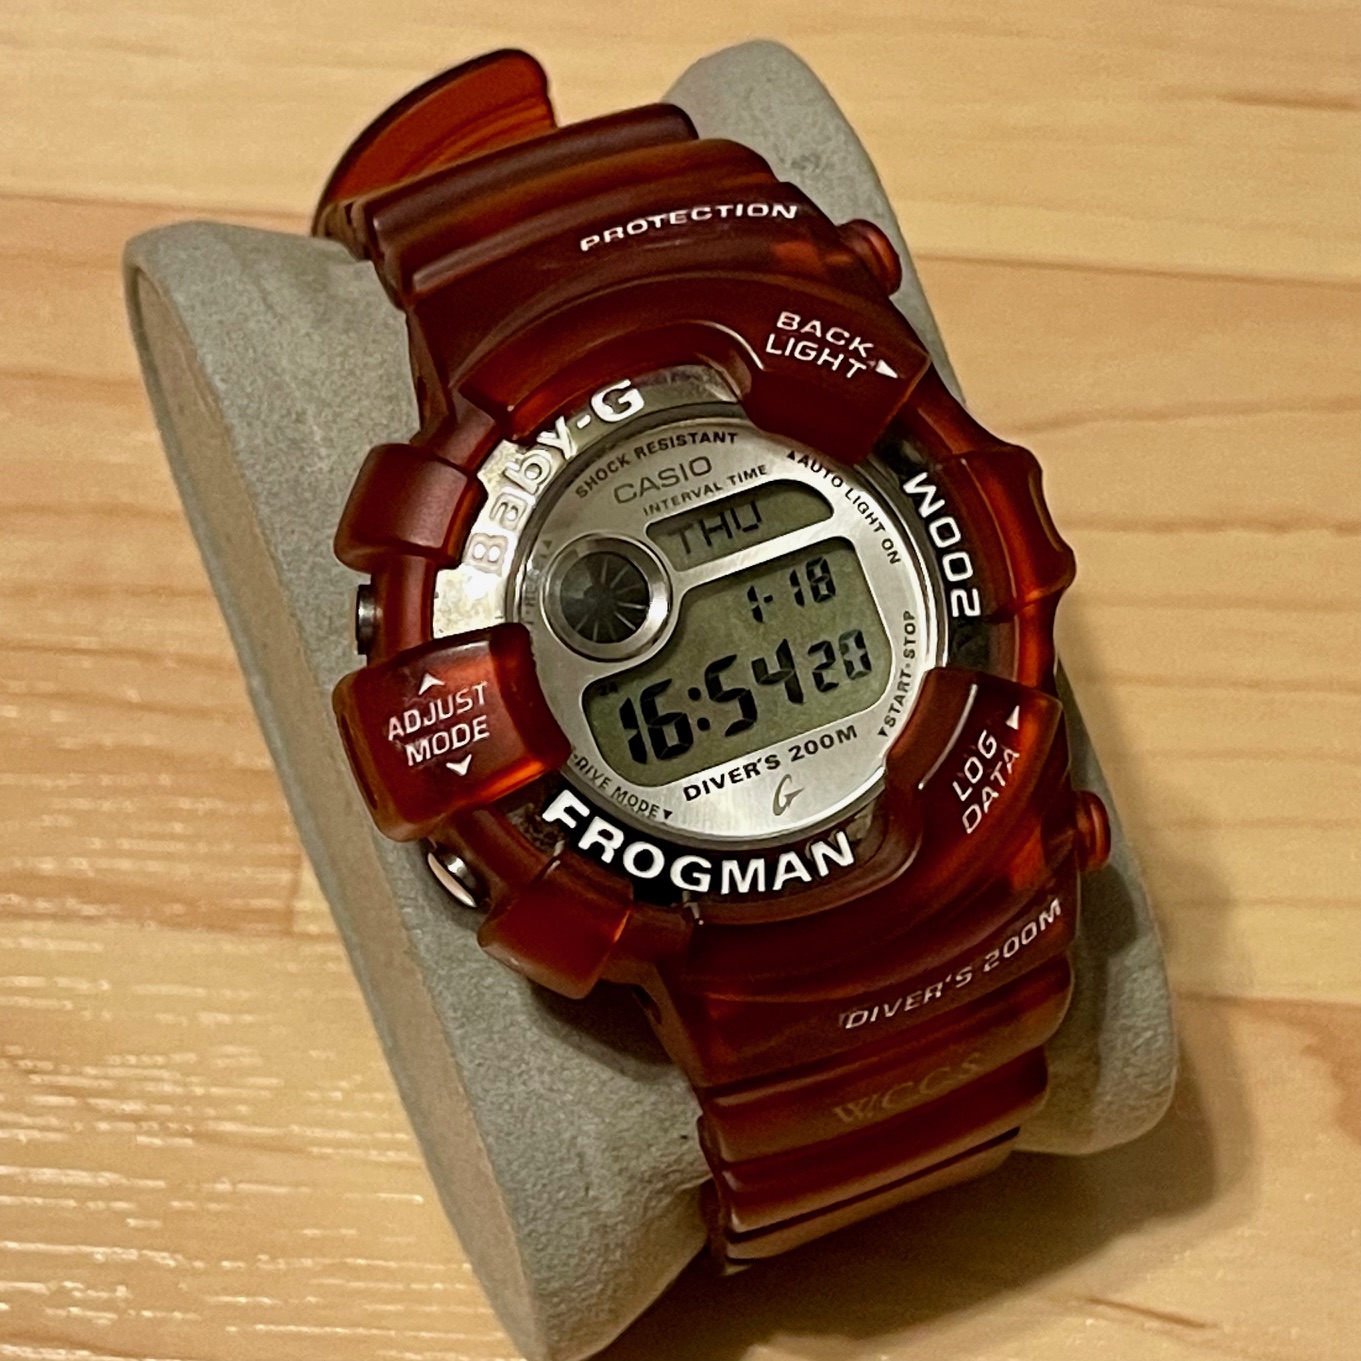 WTS] Casio G-Shock Baby-G Frogman Candy Apple Red Custom Jelly